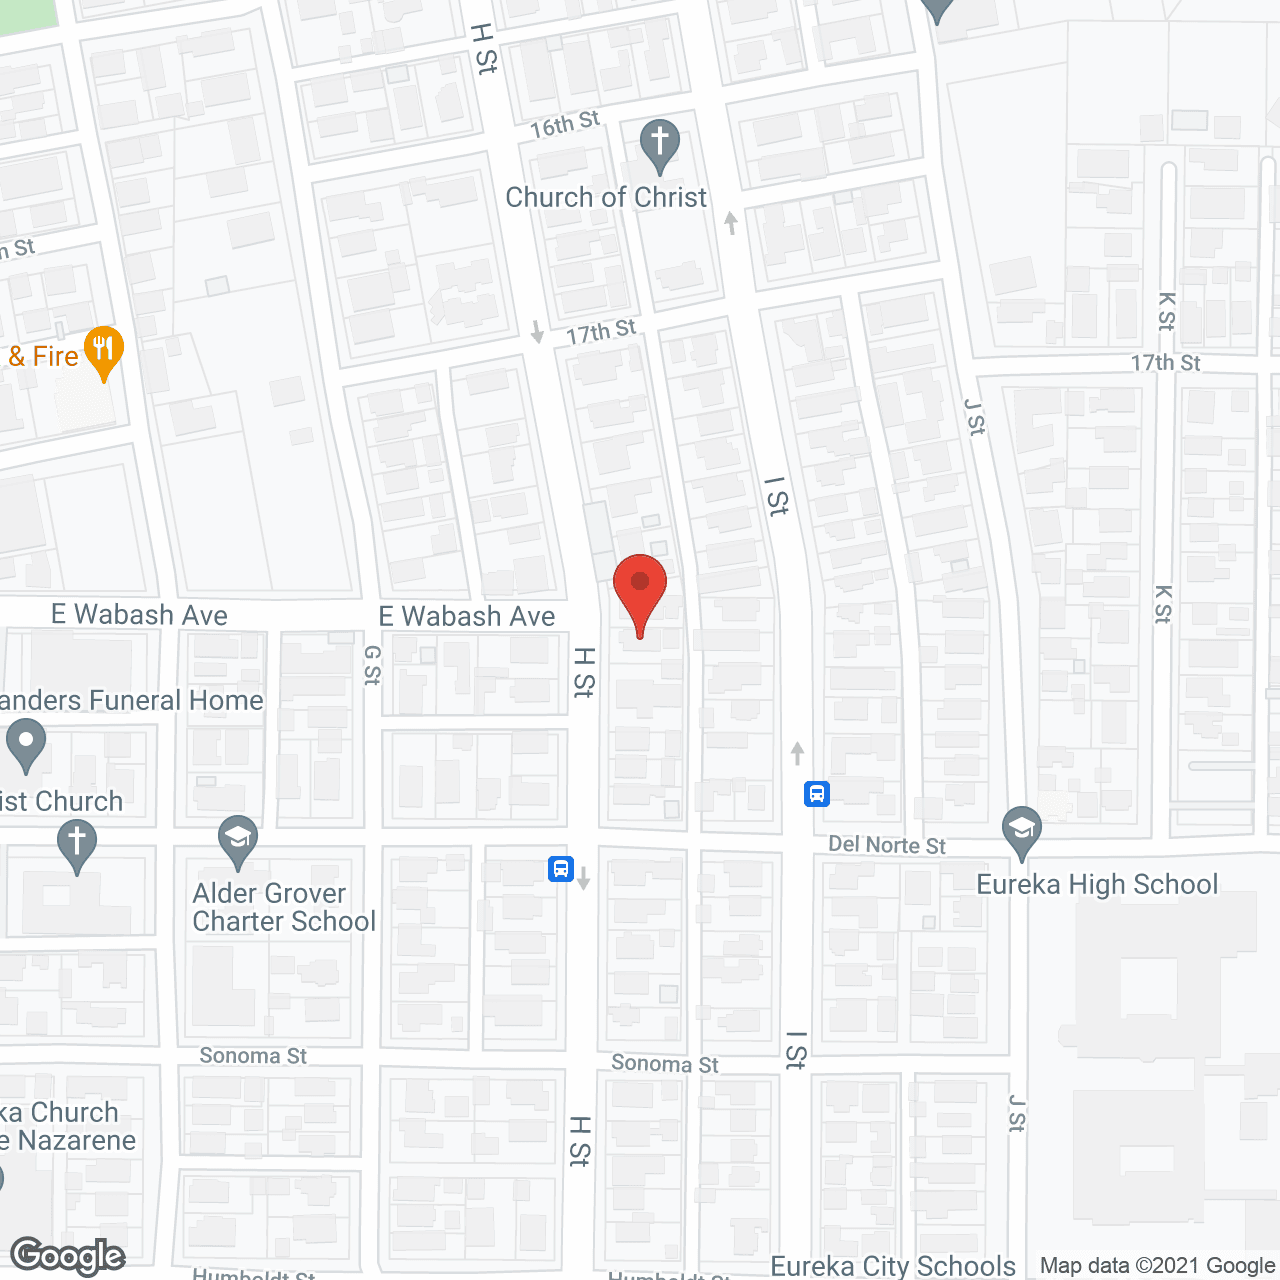 Double RR Care Home Corp in google map